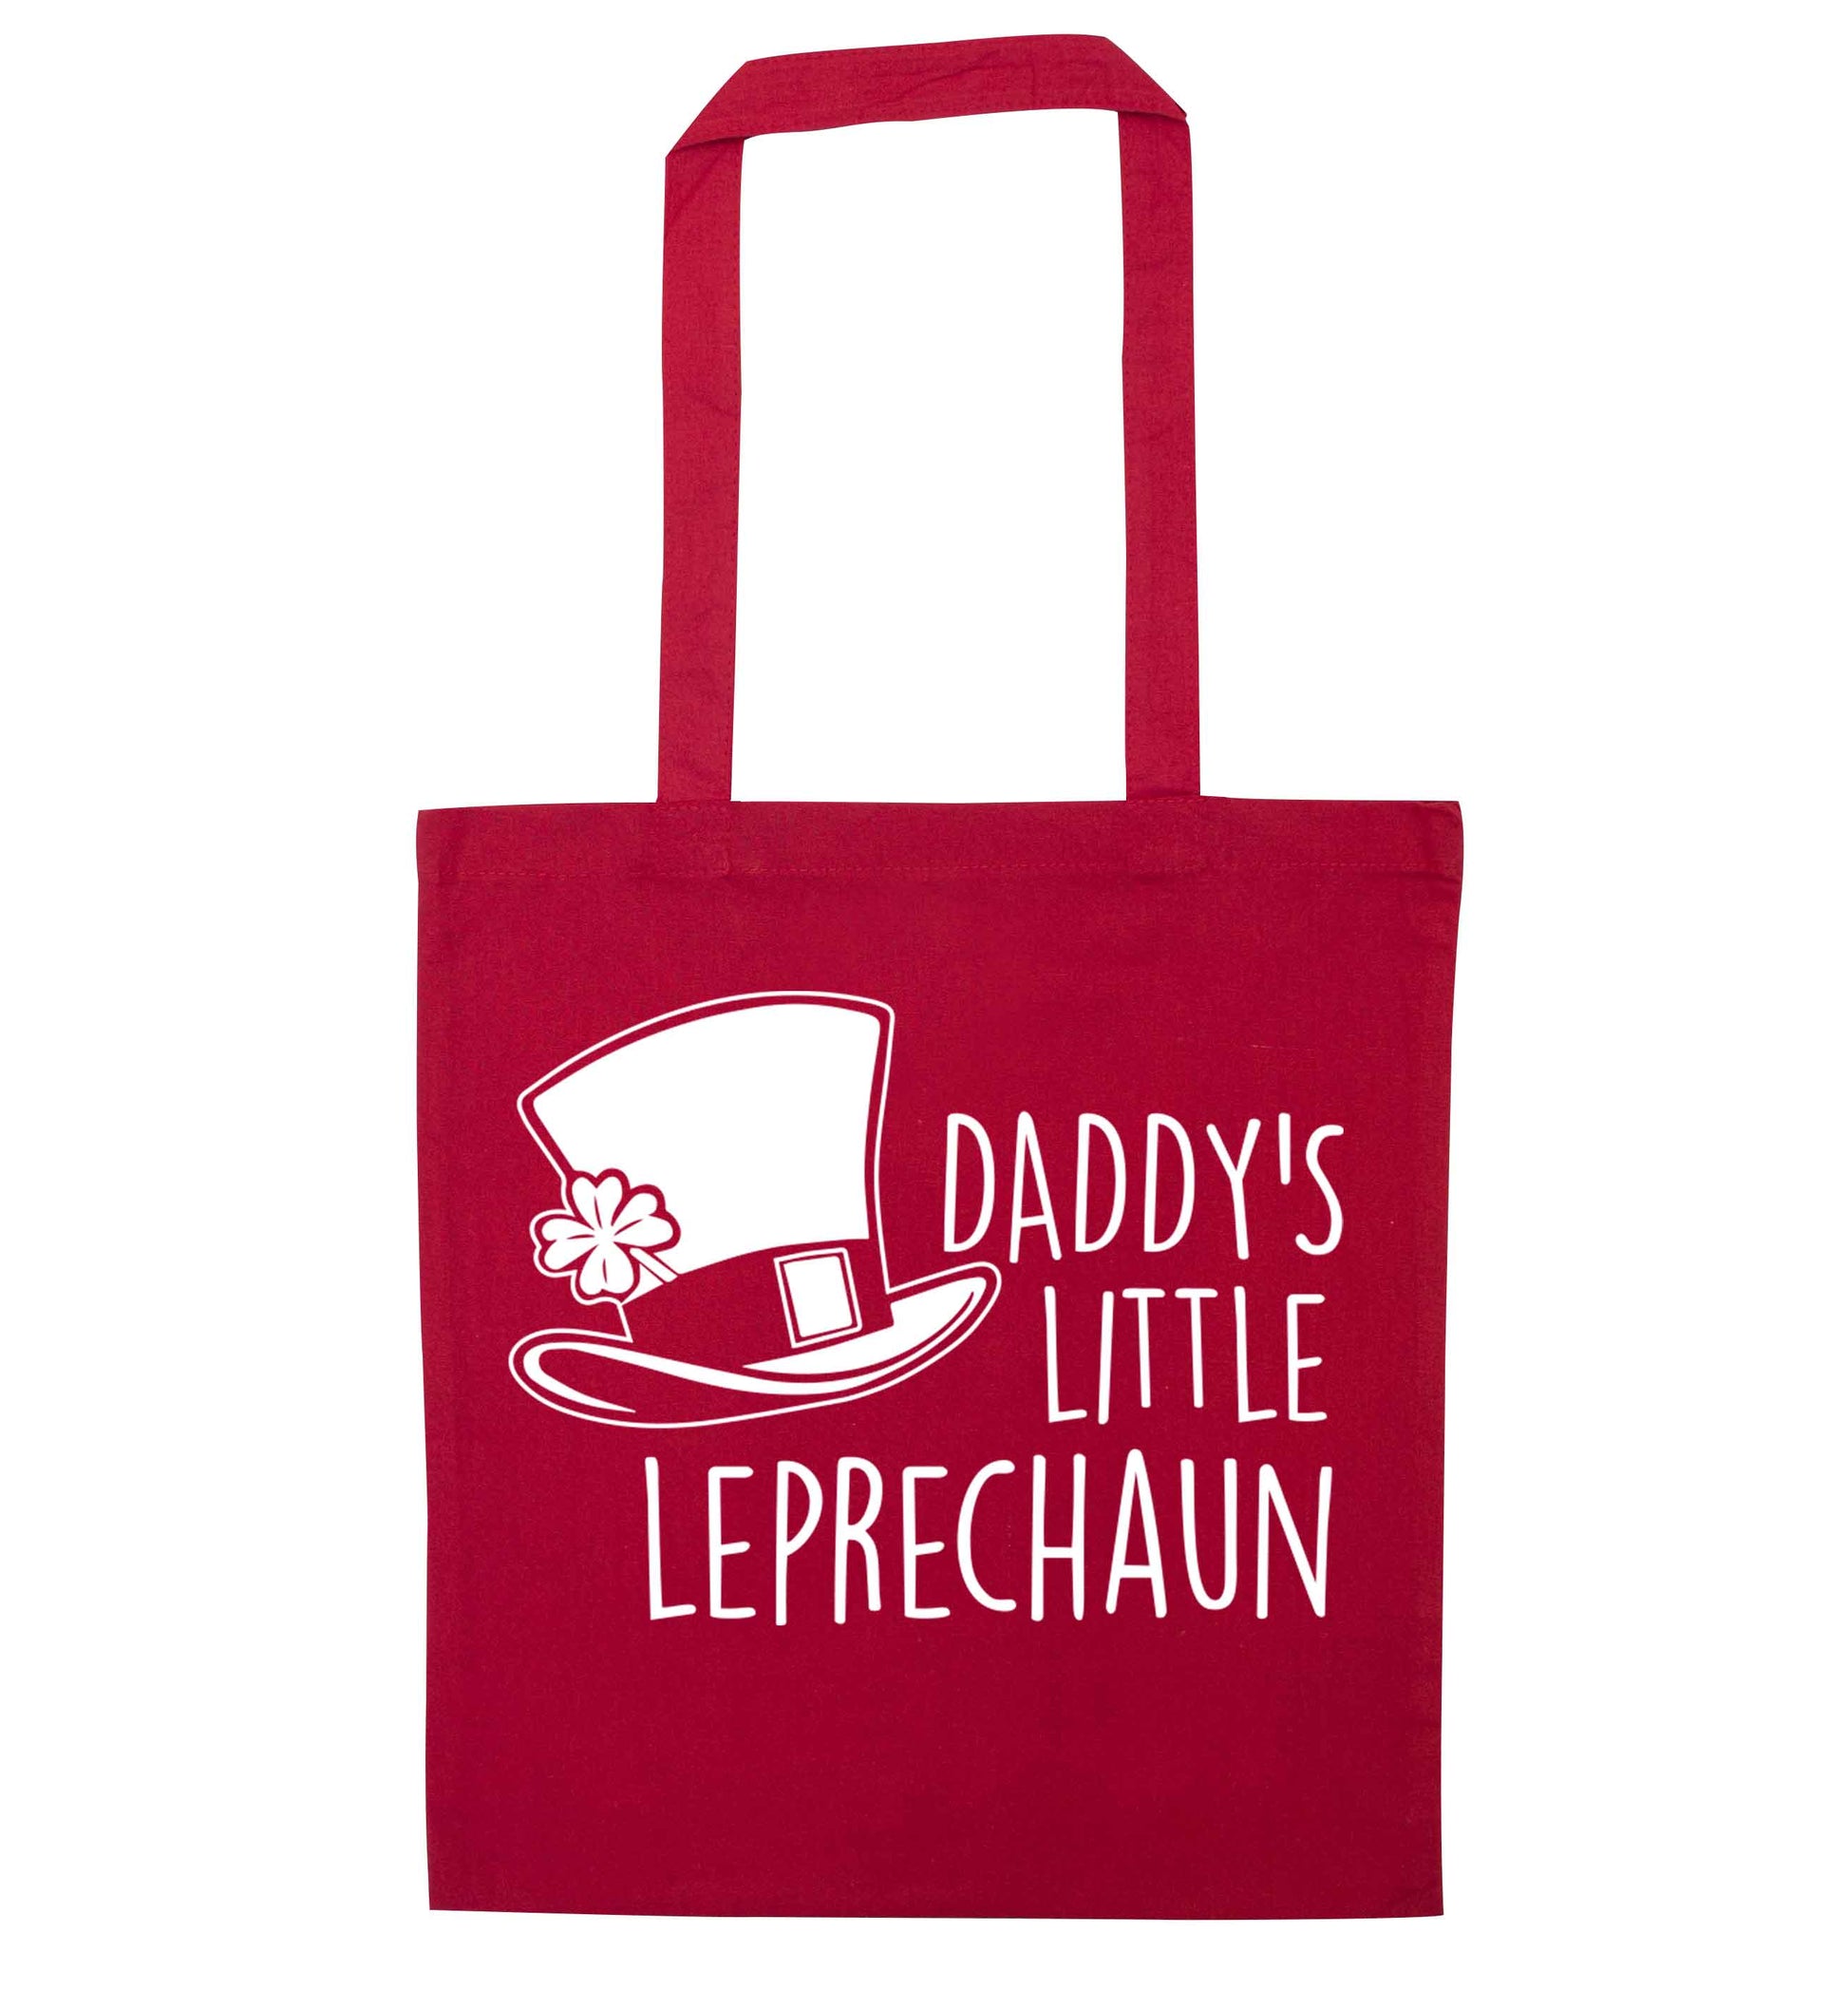 Daddy's little leprechaun red tote bag